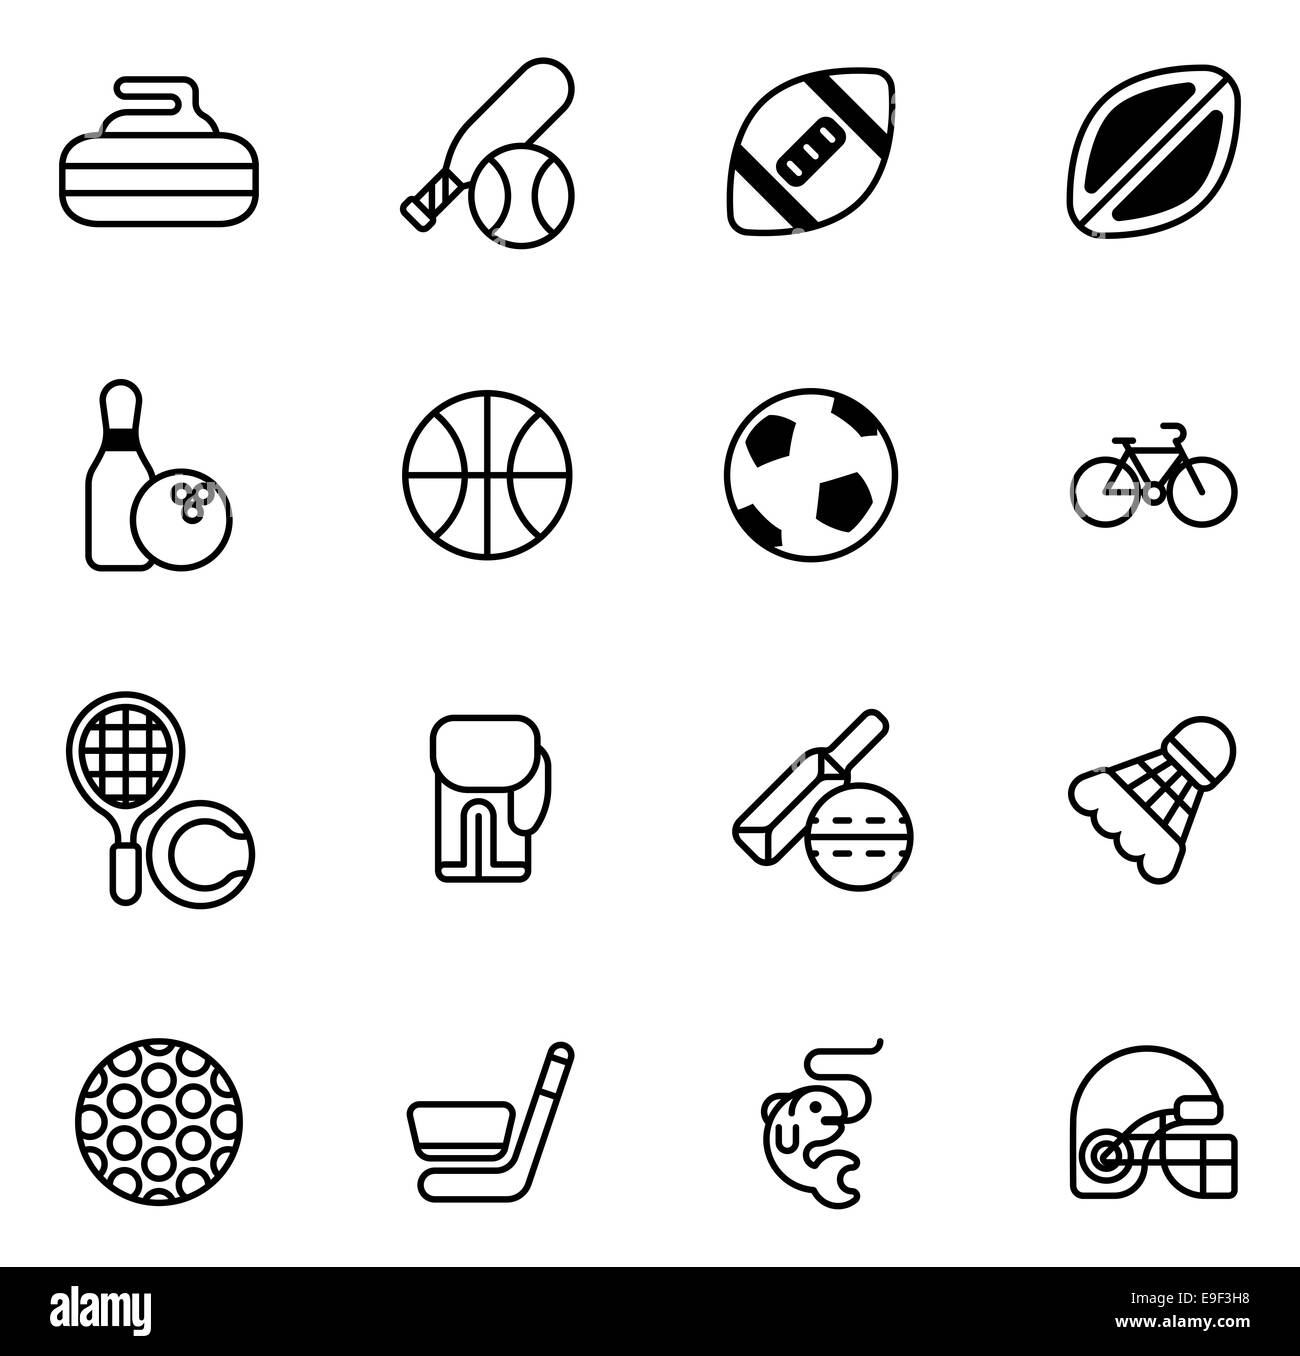 Sports icons set with icons for many sports including football, cricket, curling and many more Stock Photo